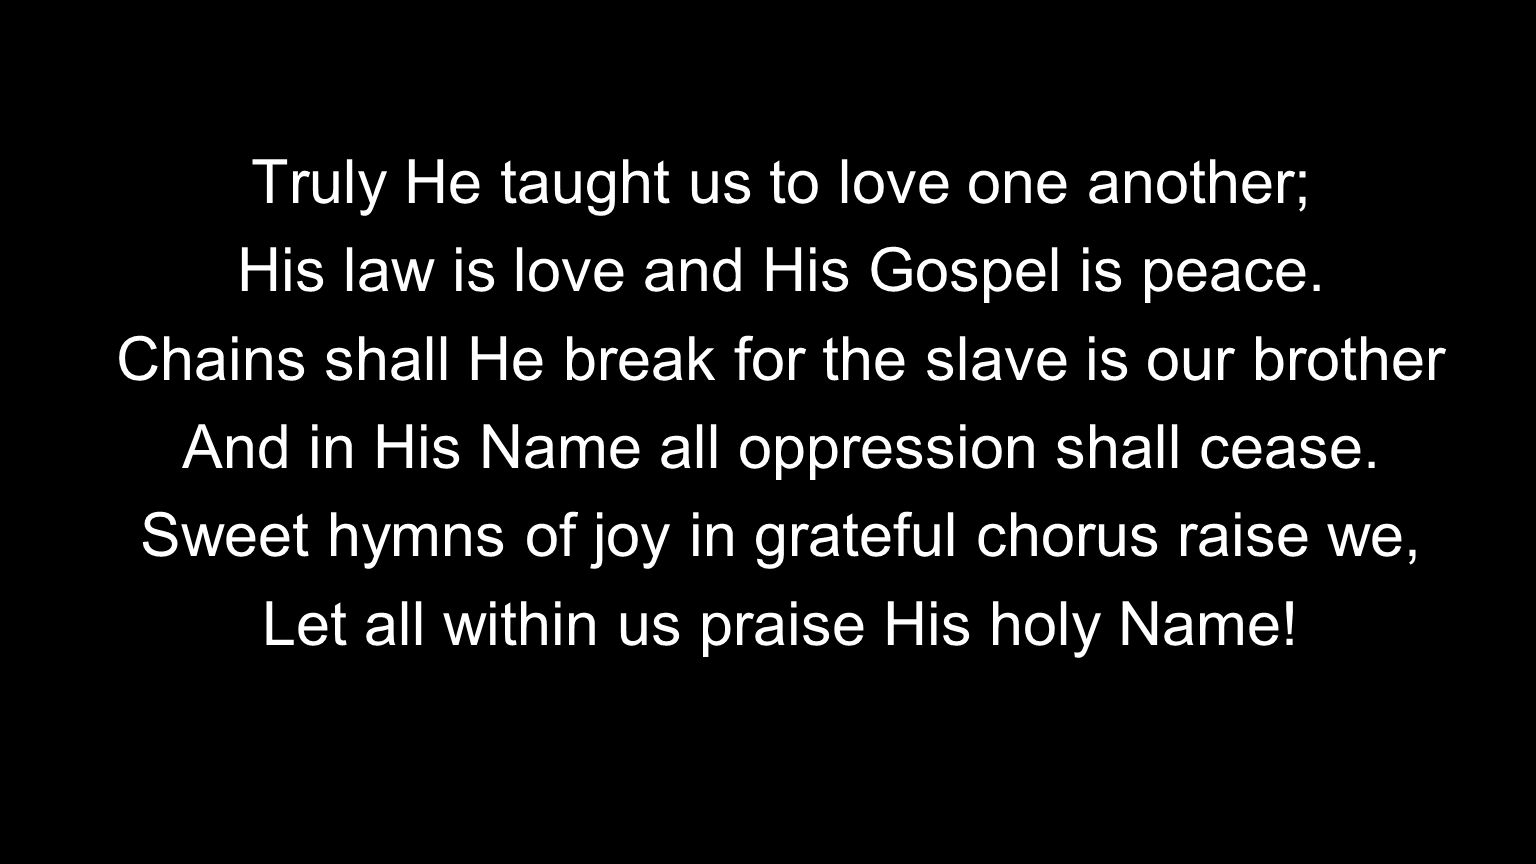 Truly He taught us to love one another; His law is love and His Gospel is peace.